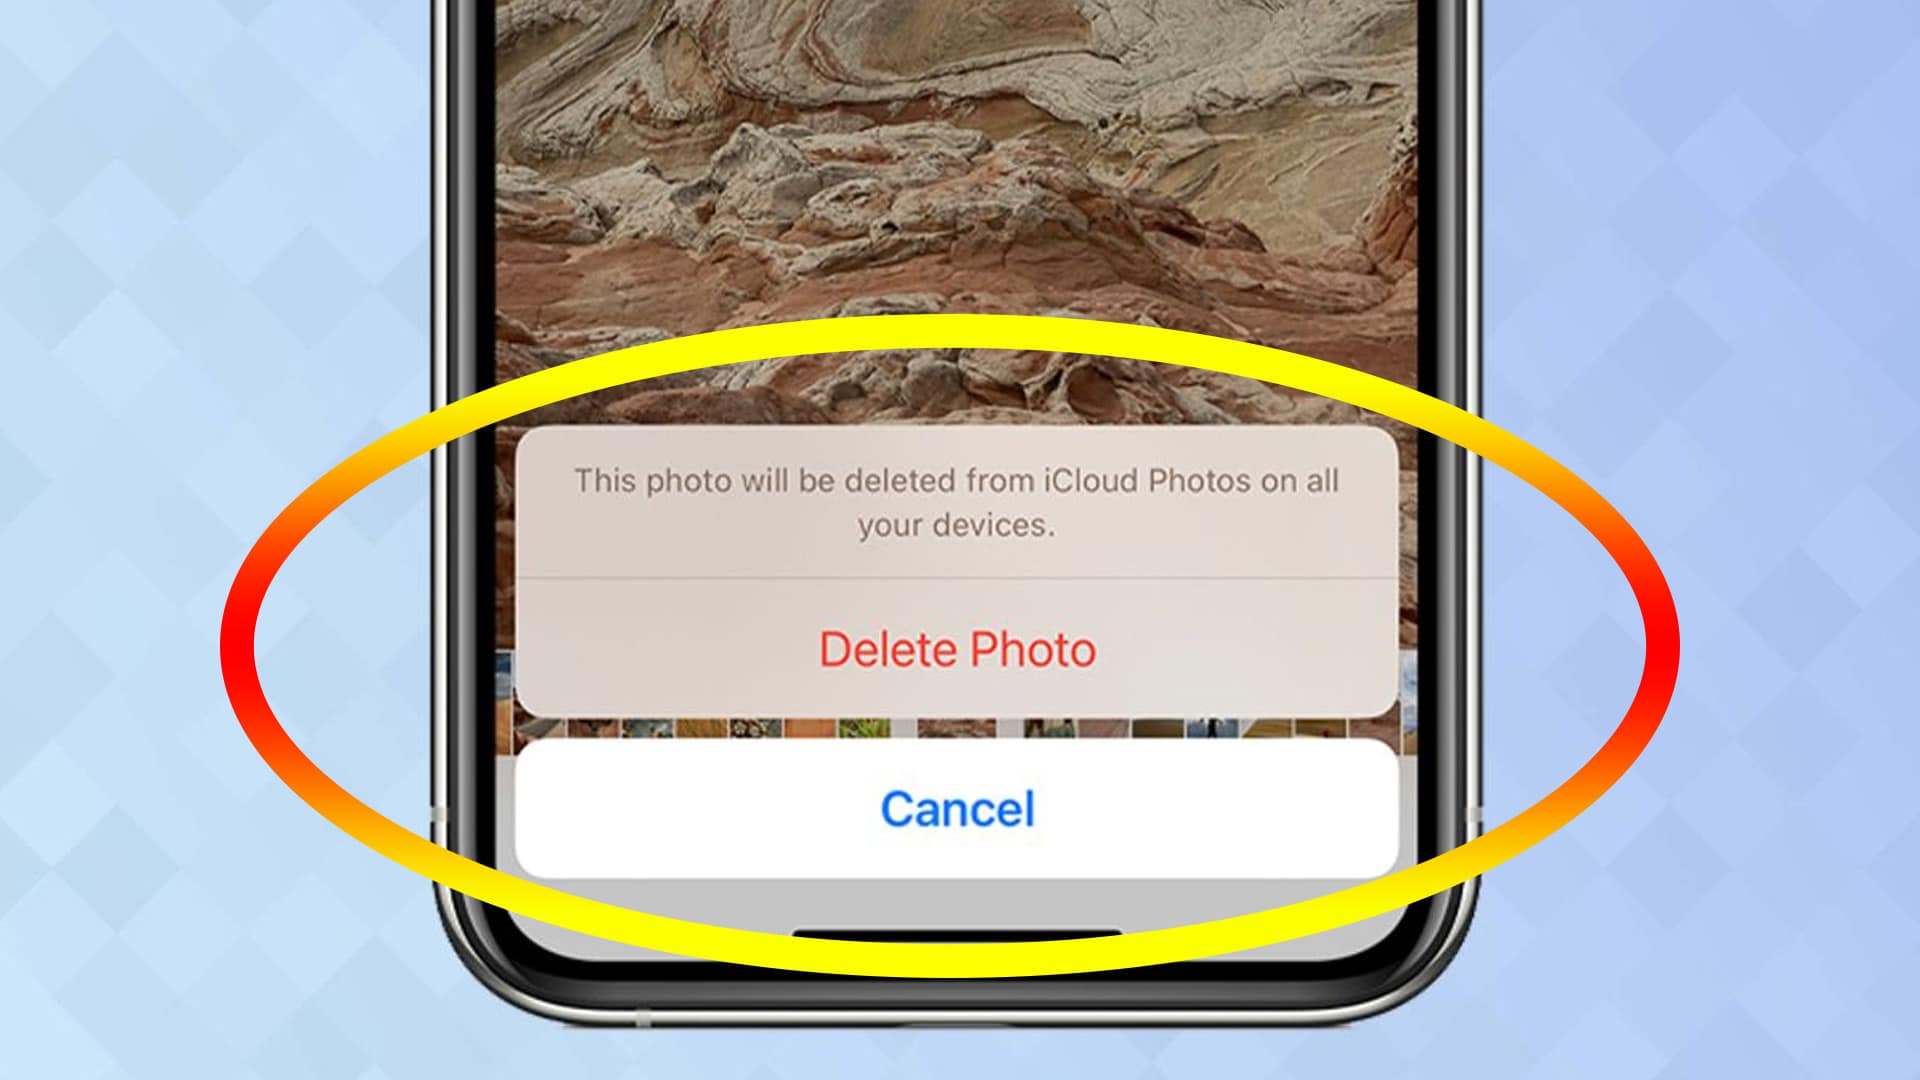 How to delete photos from your iPhone or iPad After Importing